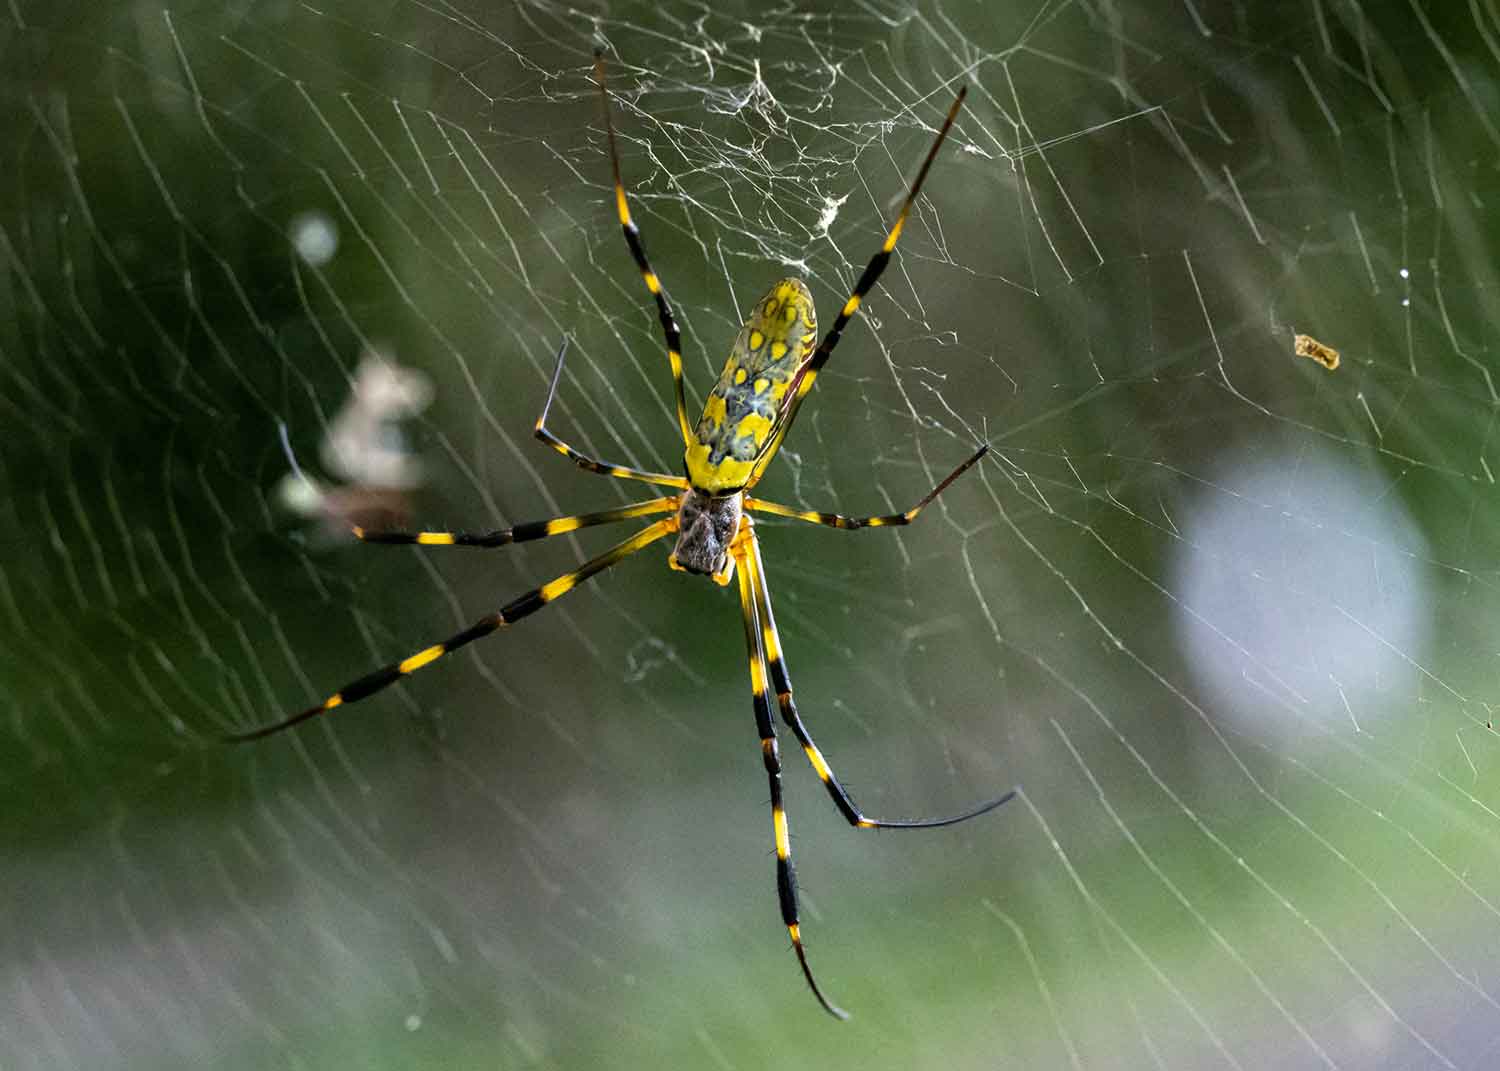 A large yellow and black spider sits on a web.